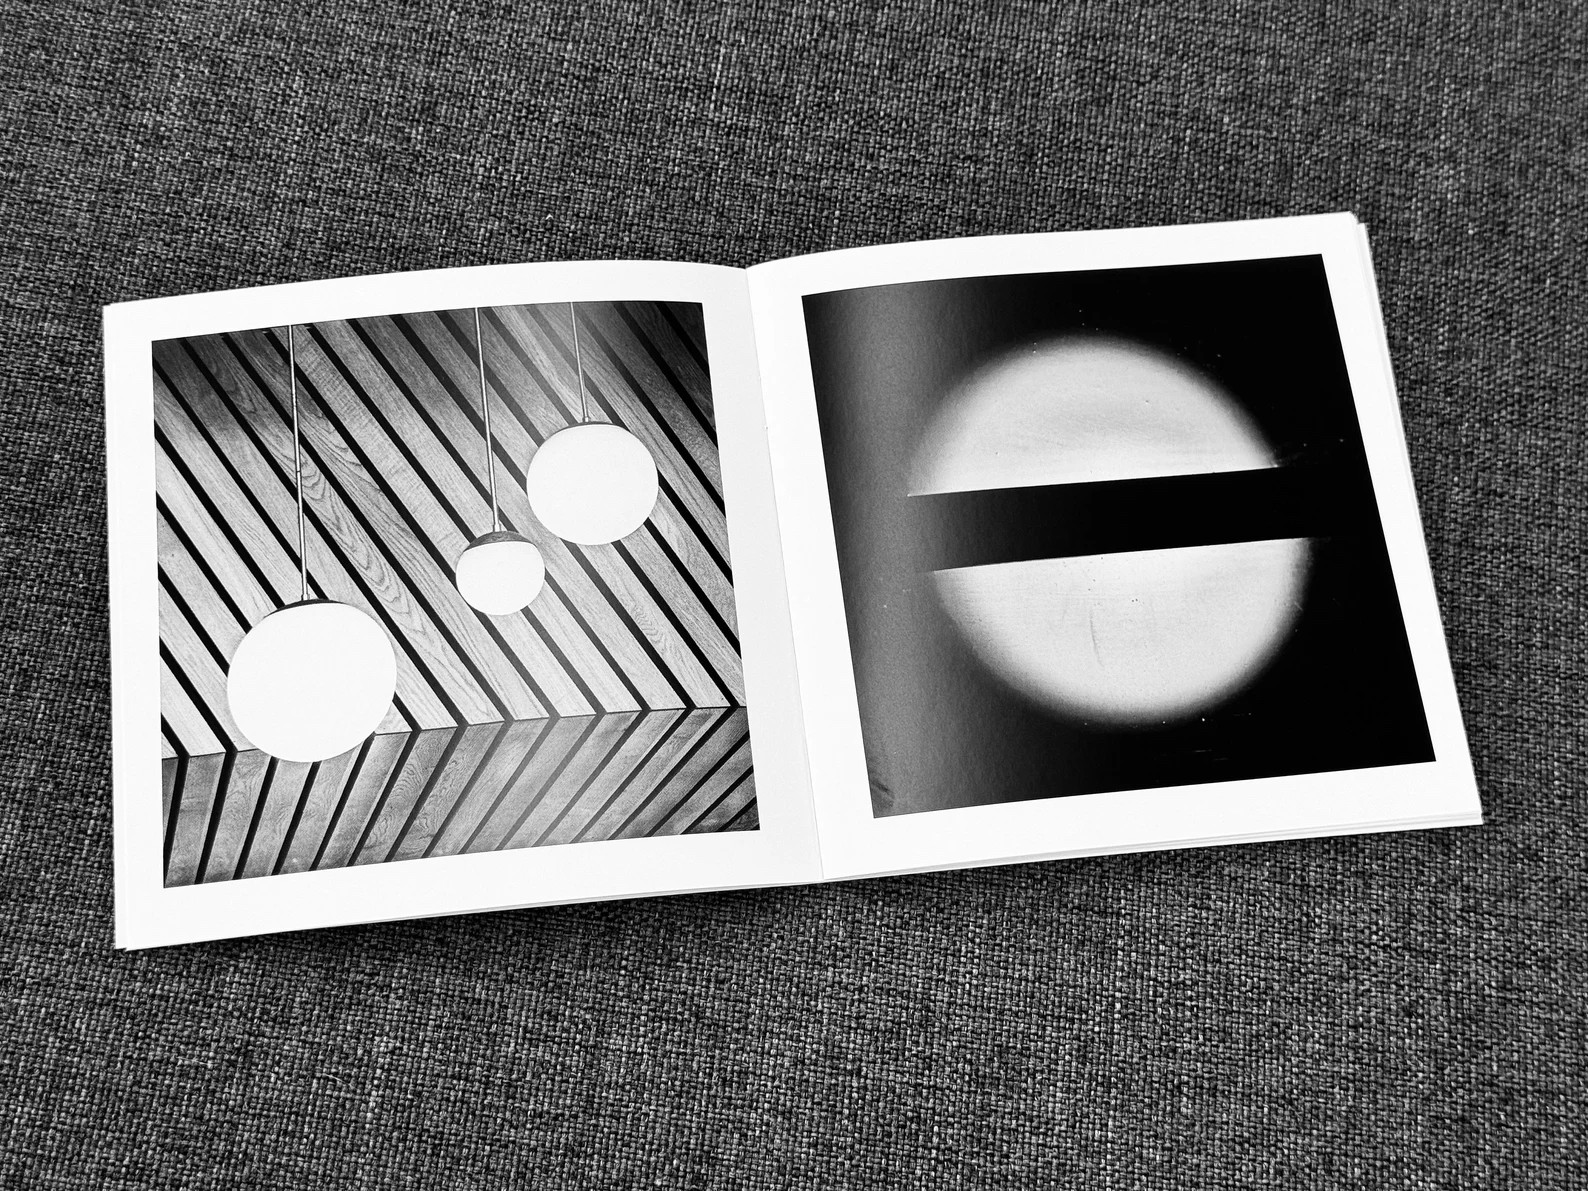 
The image displays an open book on a gray fabric surface, showing two black and white photographs spread across both pages. On the left side, there is an abstract composition with three white circles, which appear to be suspended, against a background of dark, diagonally-striped patterns. On the right side, the photo depicts a large white circle with a dark horizontal line through its center, creating a bold contrast. The circle appears to be glowing, with a halo-like effect, against a dark background. Both images exhibit a play of geometry and contrast, focusing on shapes and the interplay of light and shadow.